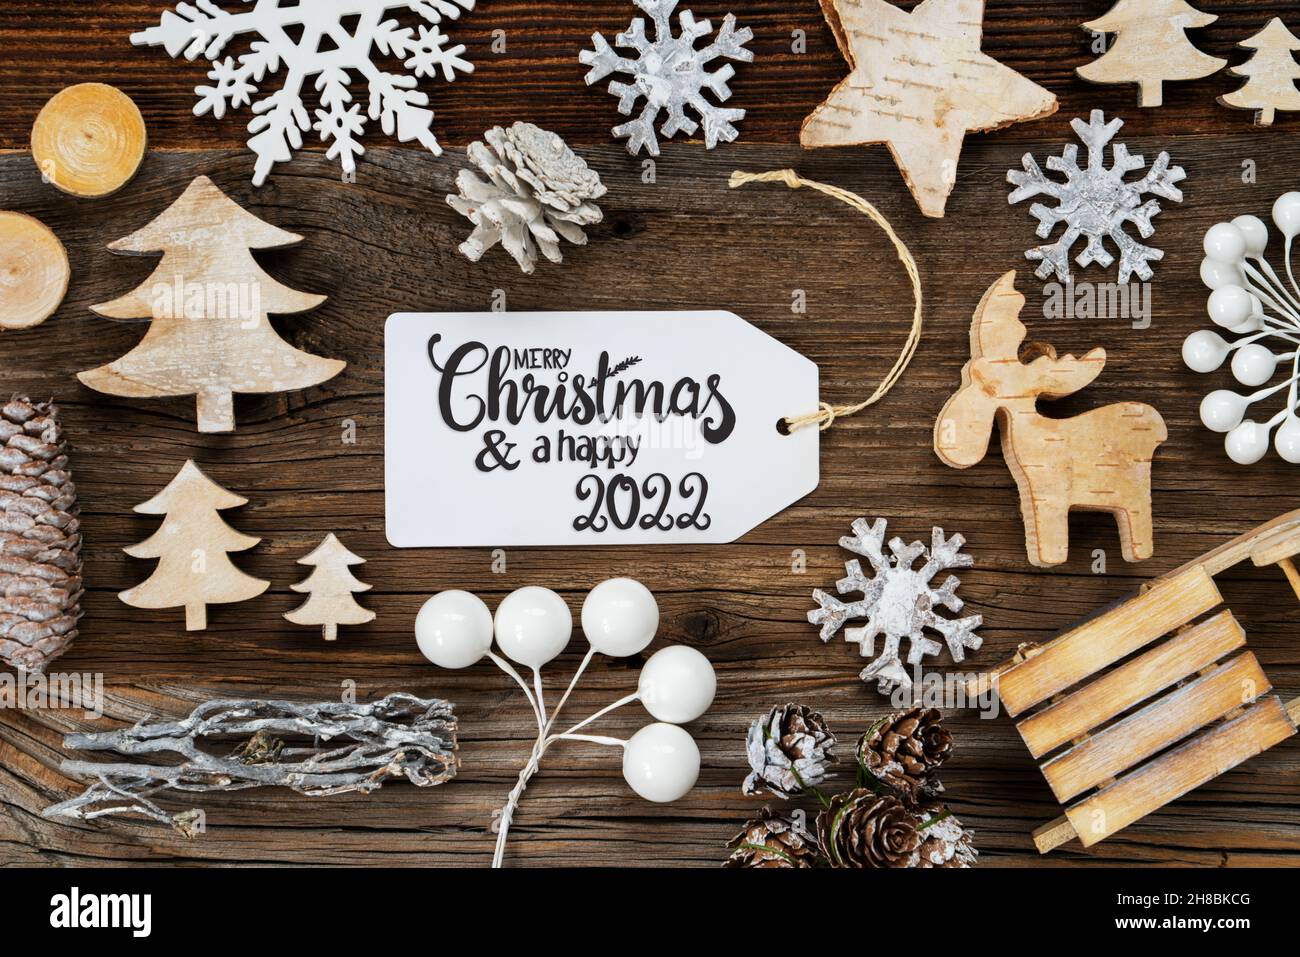 Label, Frame Of Christmas Decoration, Merry Christmas And Happy 2022 Stock Photo